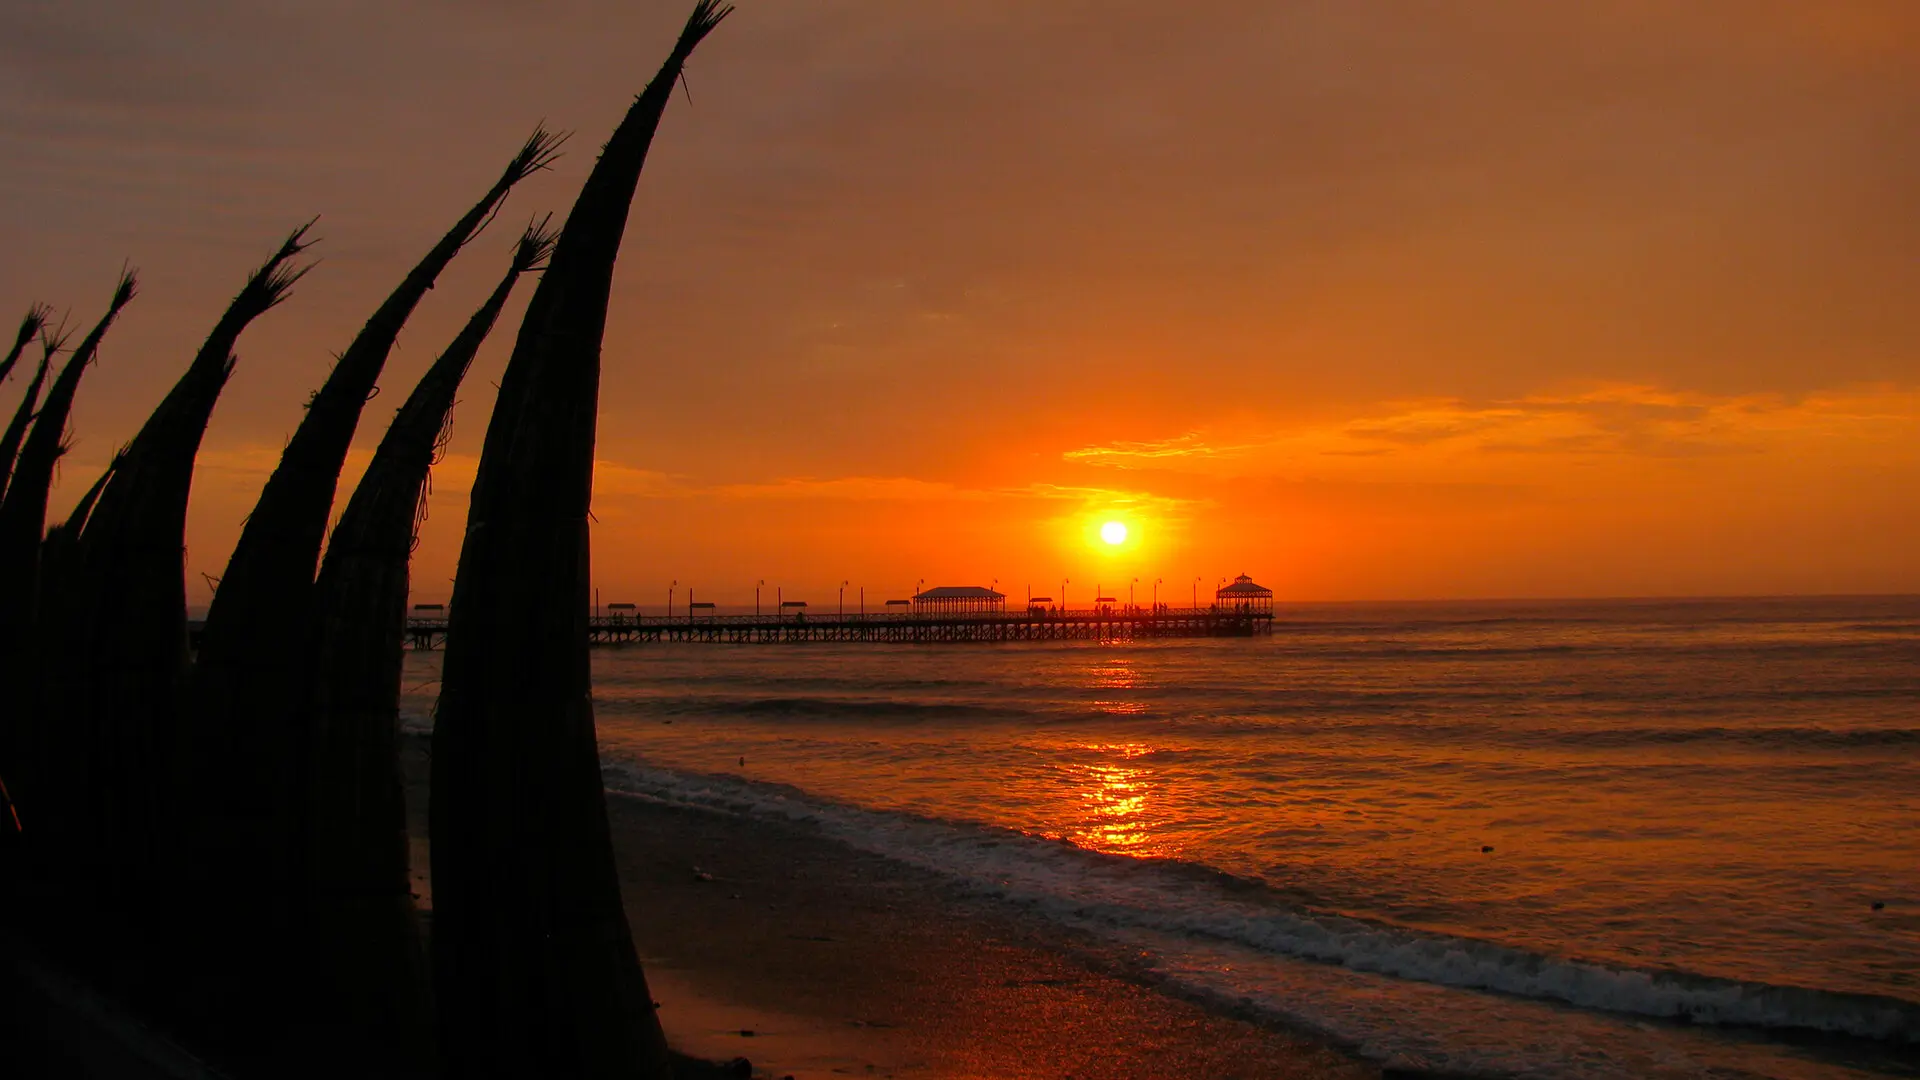 Sunset at Huanchaco beach with a view of its pier and totora boats (caballitos) standing on the shore | RESPONSible Travel Peru